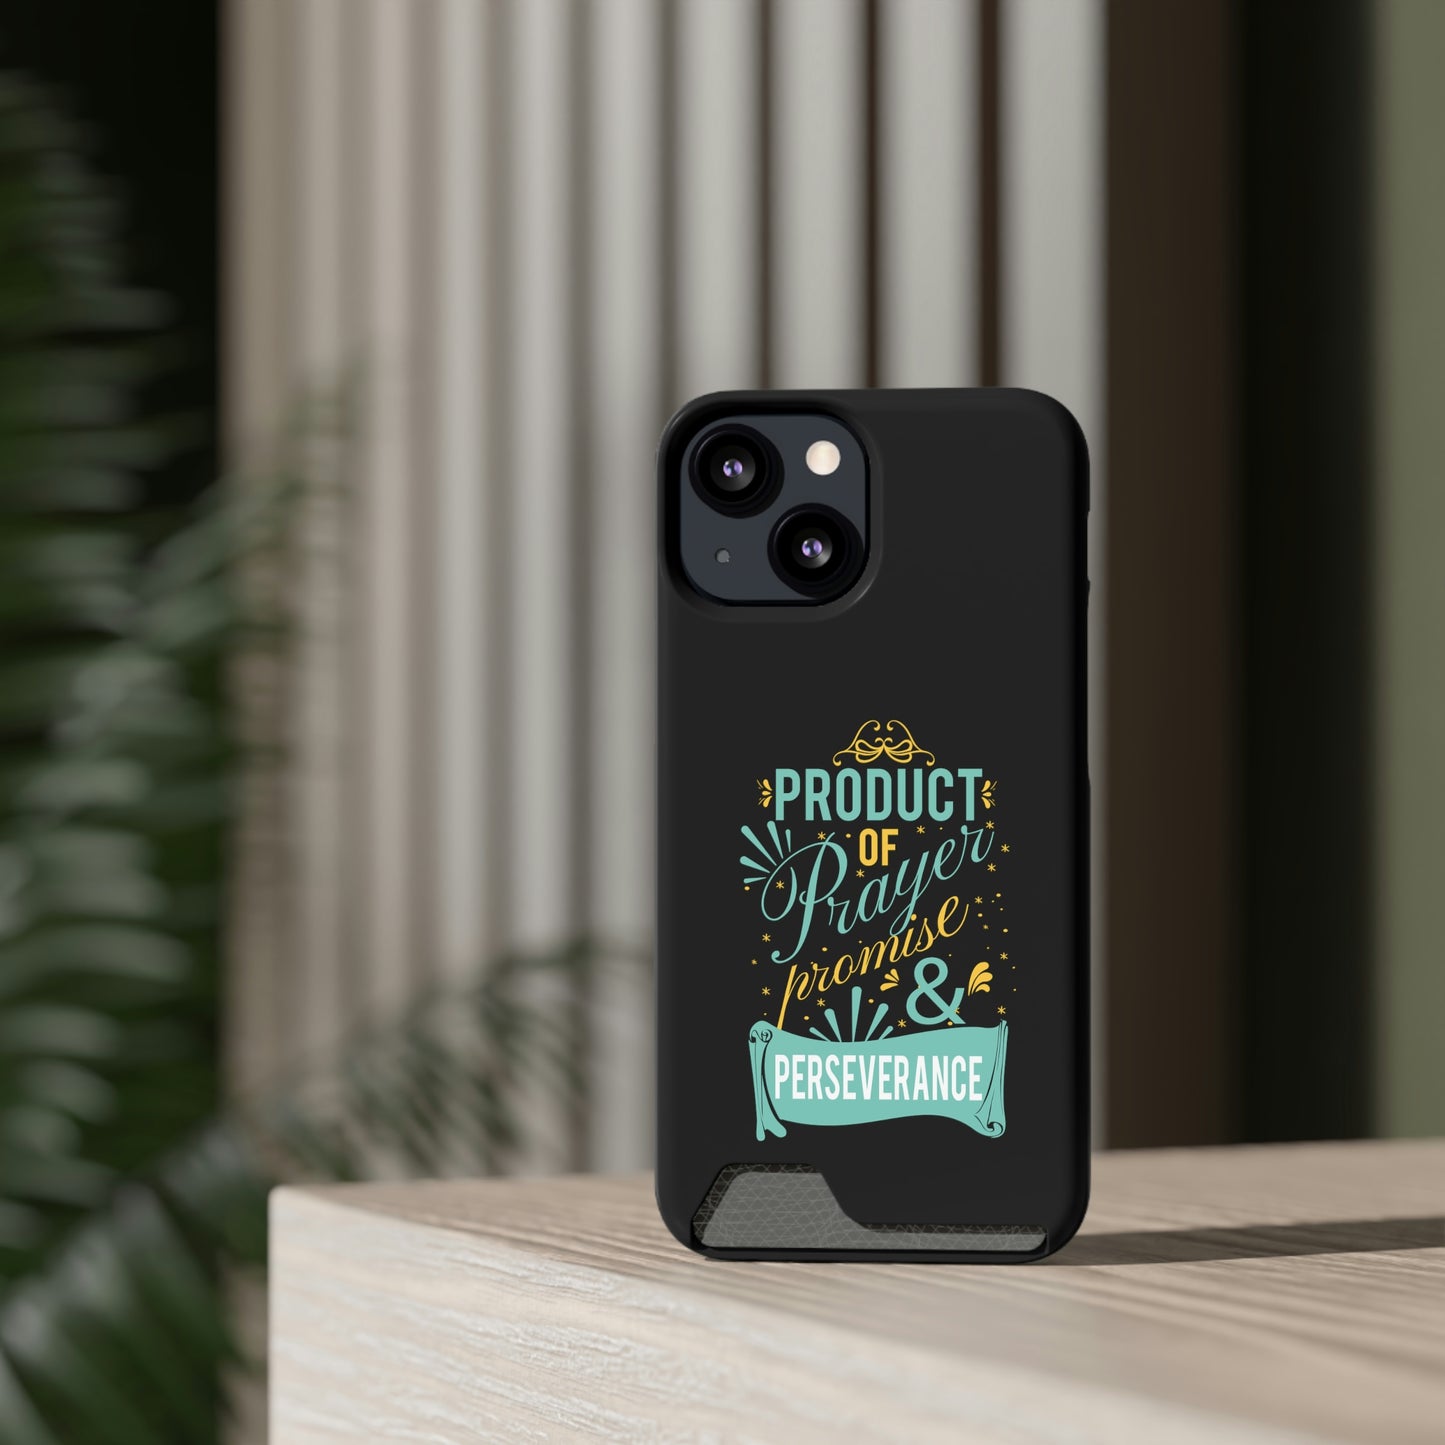 Product Of Prayer Promise And Perseverance Phone Case With Card Holder